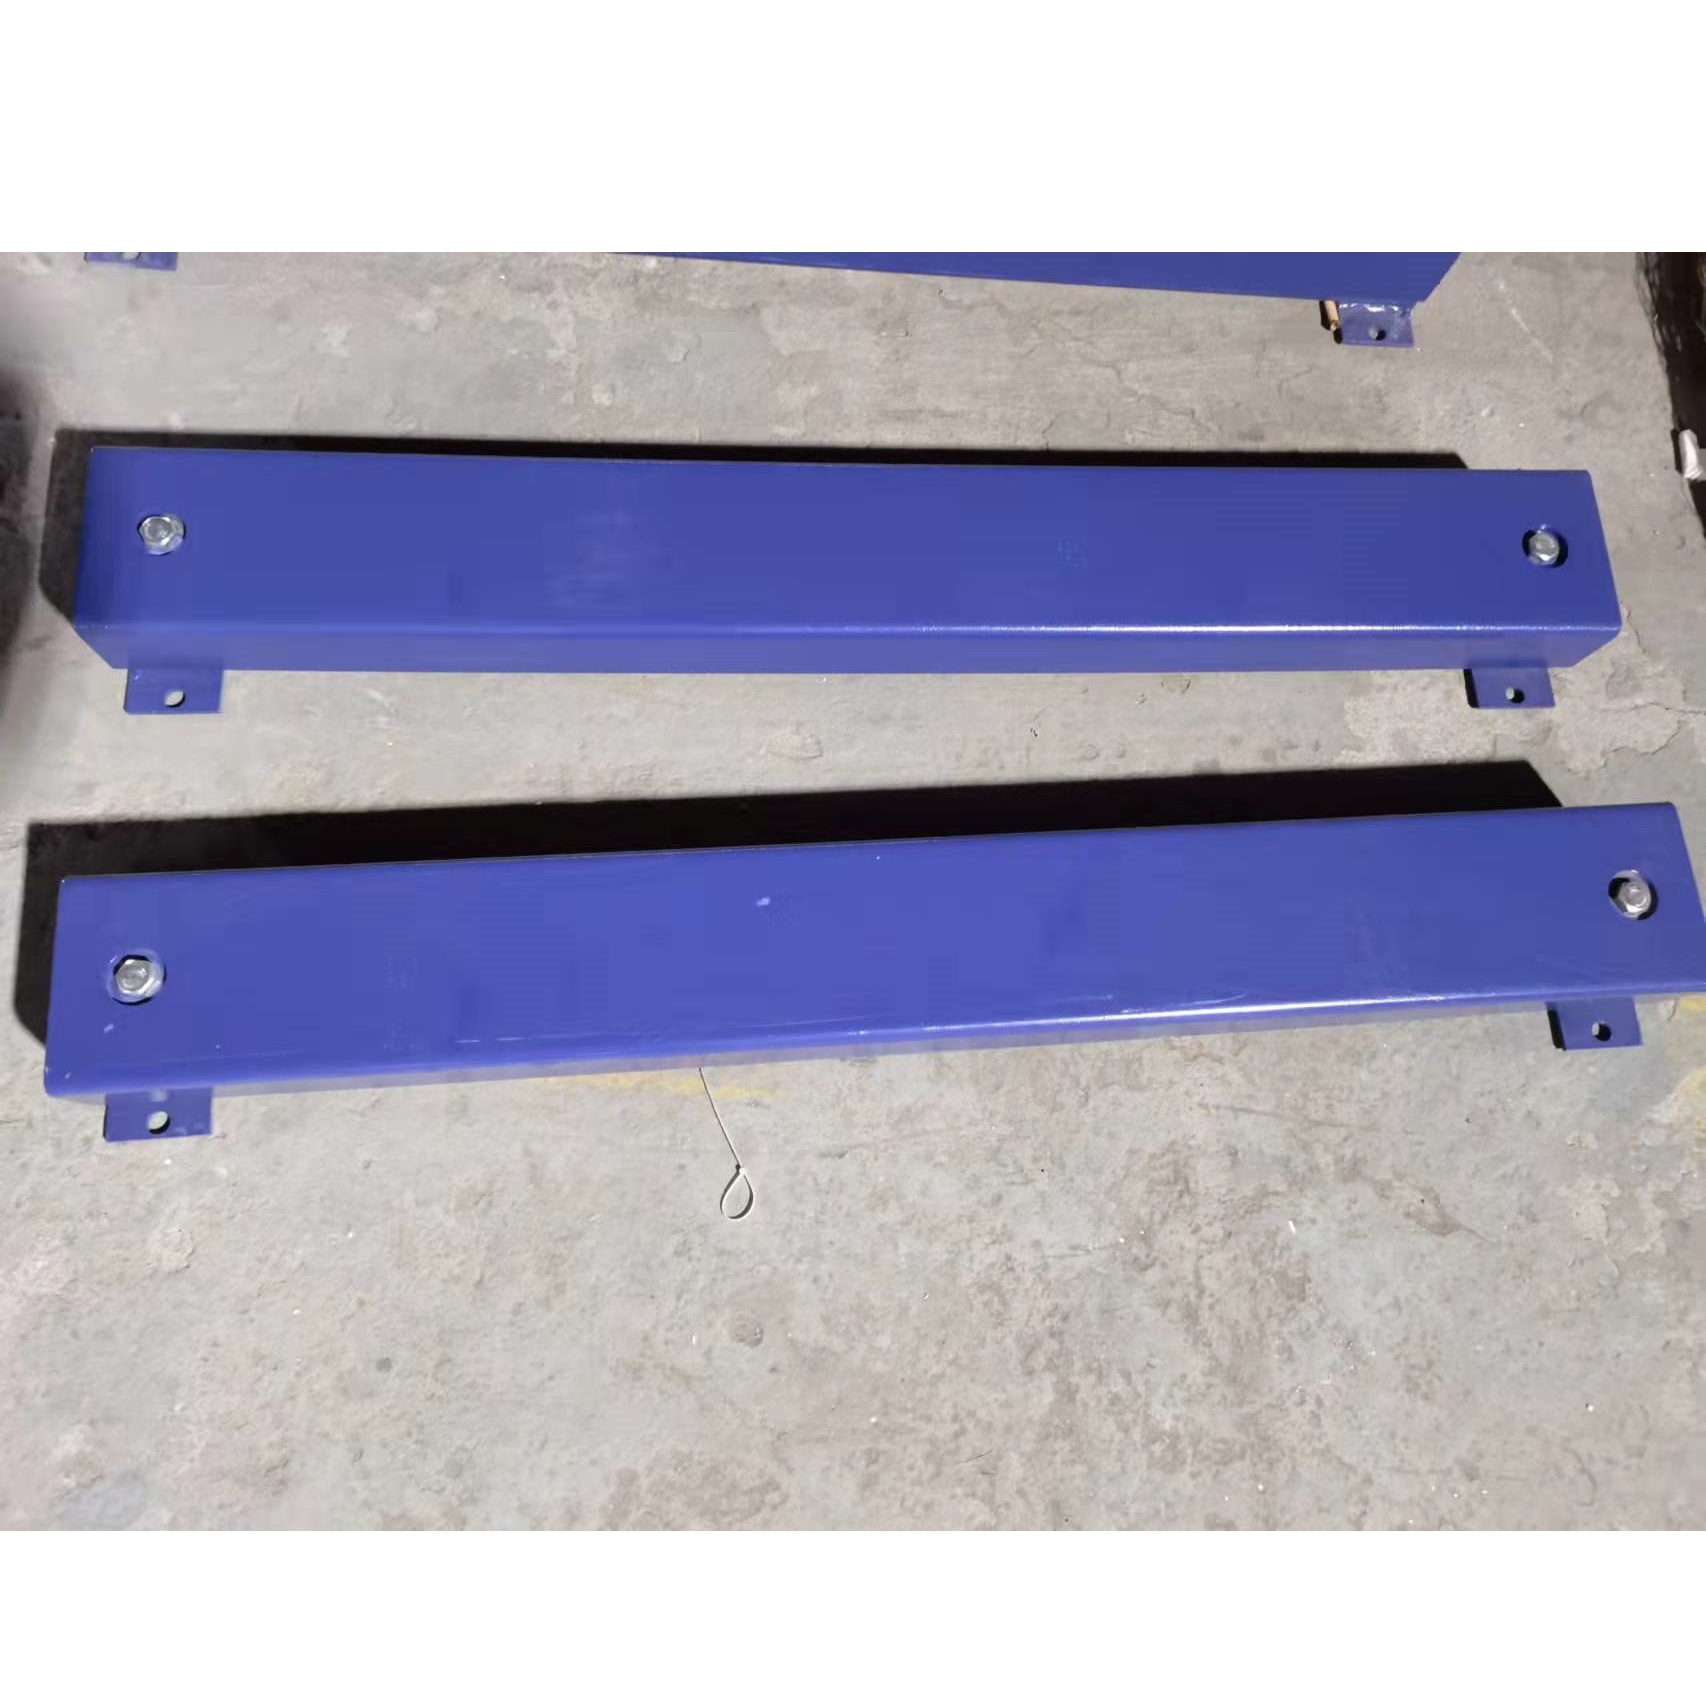 PBS02 Beam Weighing Scale Weighing Beam Scale